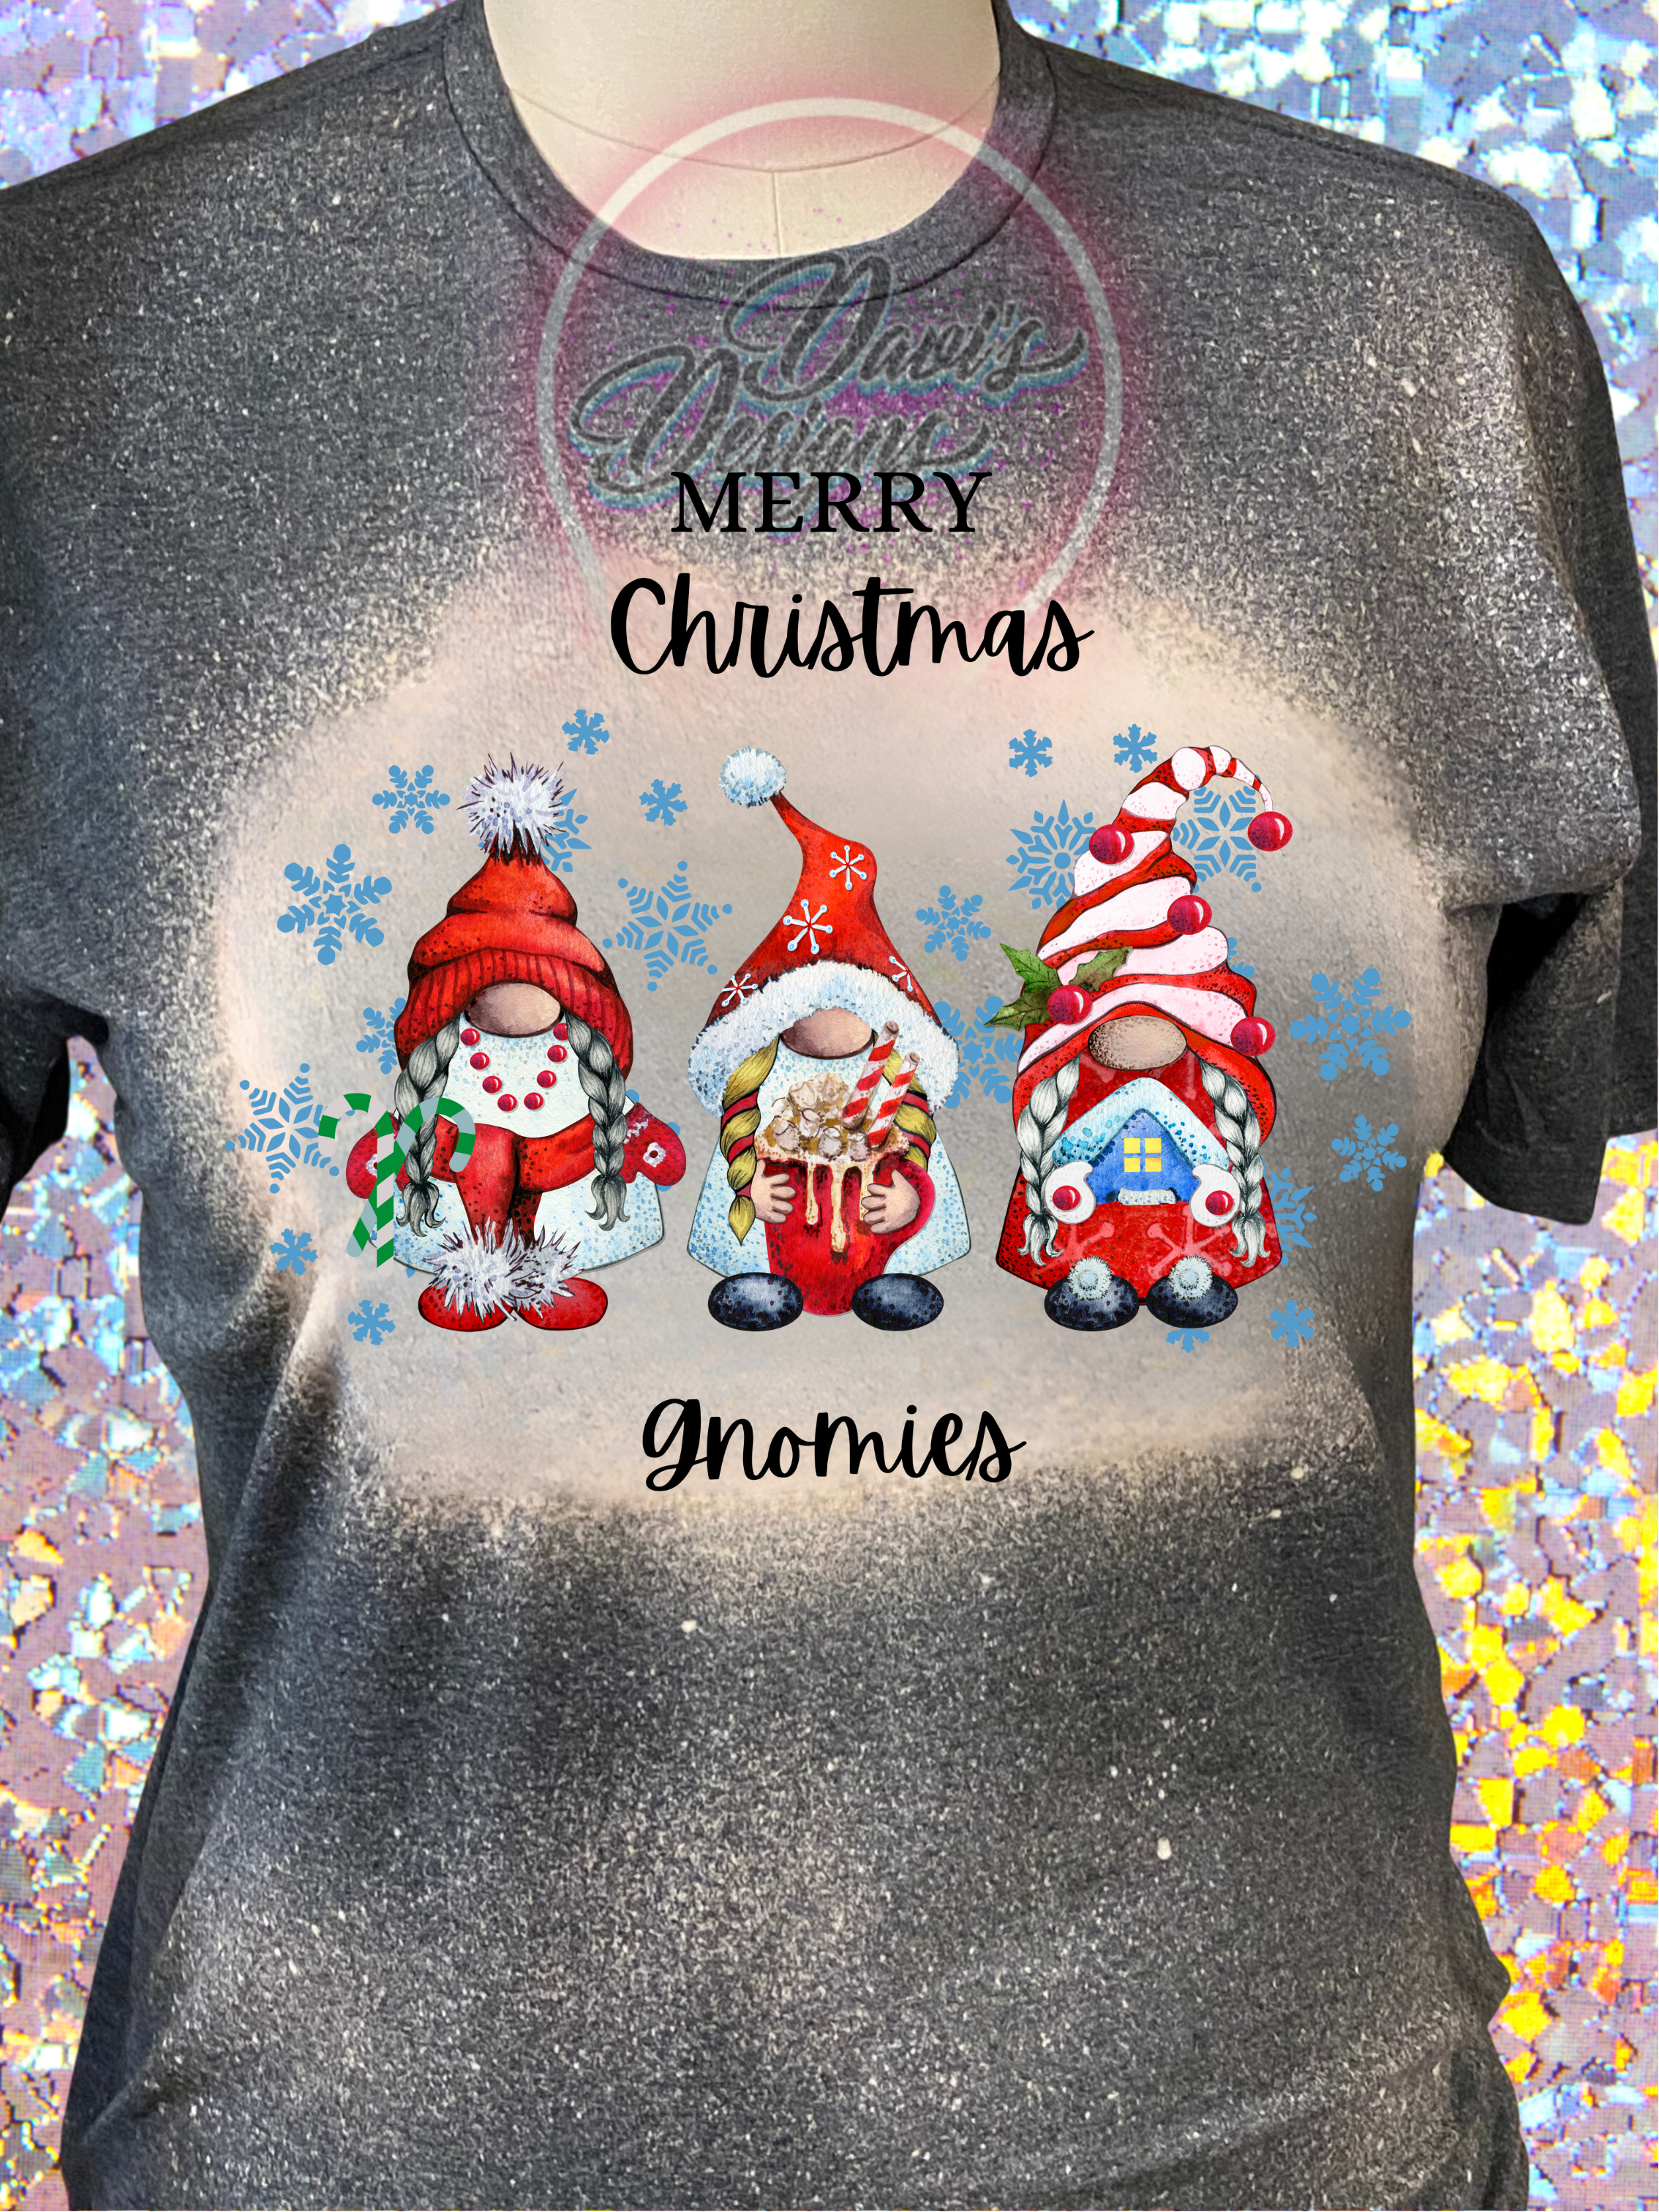 Dark Heather Bleached tee with Merry Christmas Gnomies quote and images of three gnomes dressed in Christmas hats and Christmas clothes.